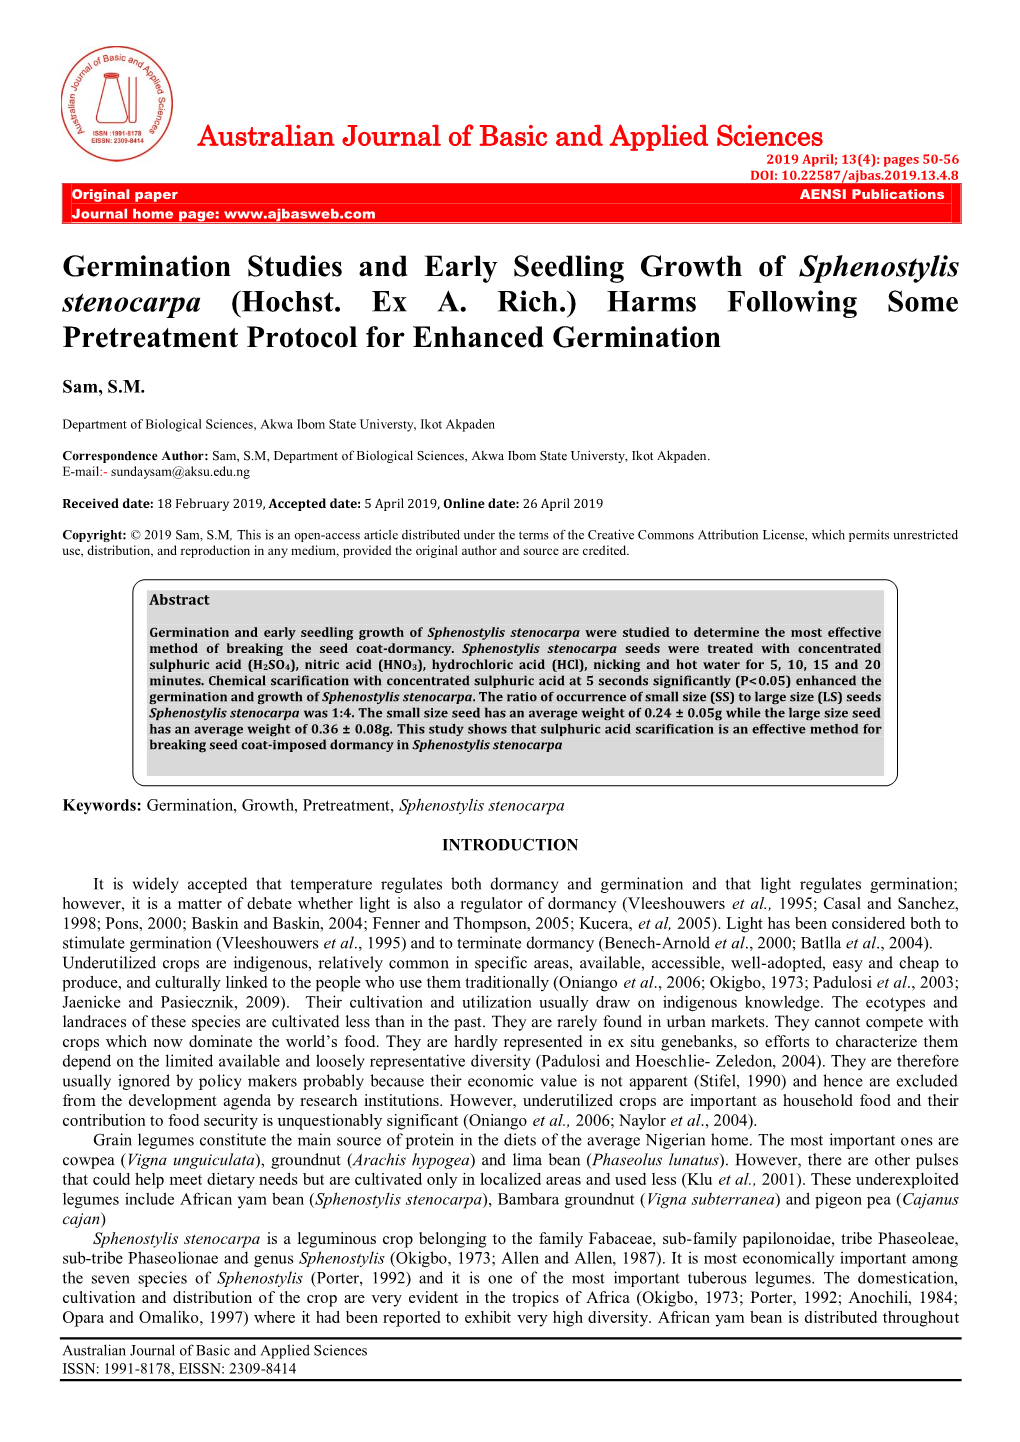 Germination Studies and Early Seedling Growth of Sphenostylis Stenocarpa (Hochst